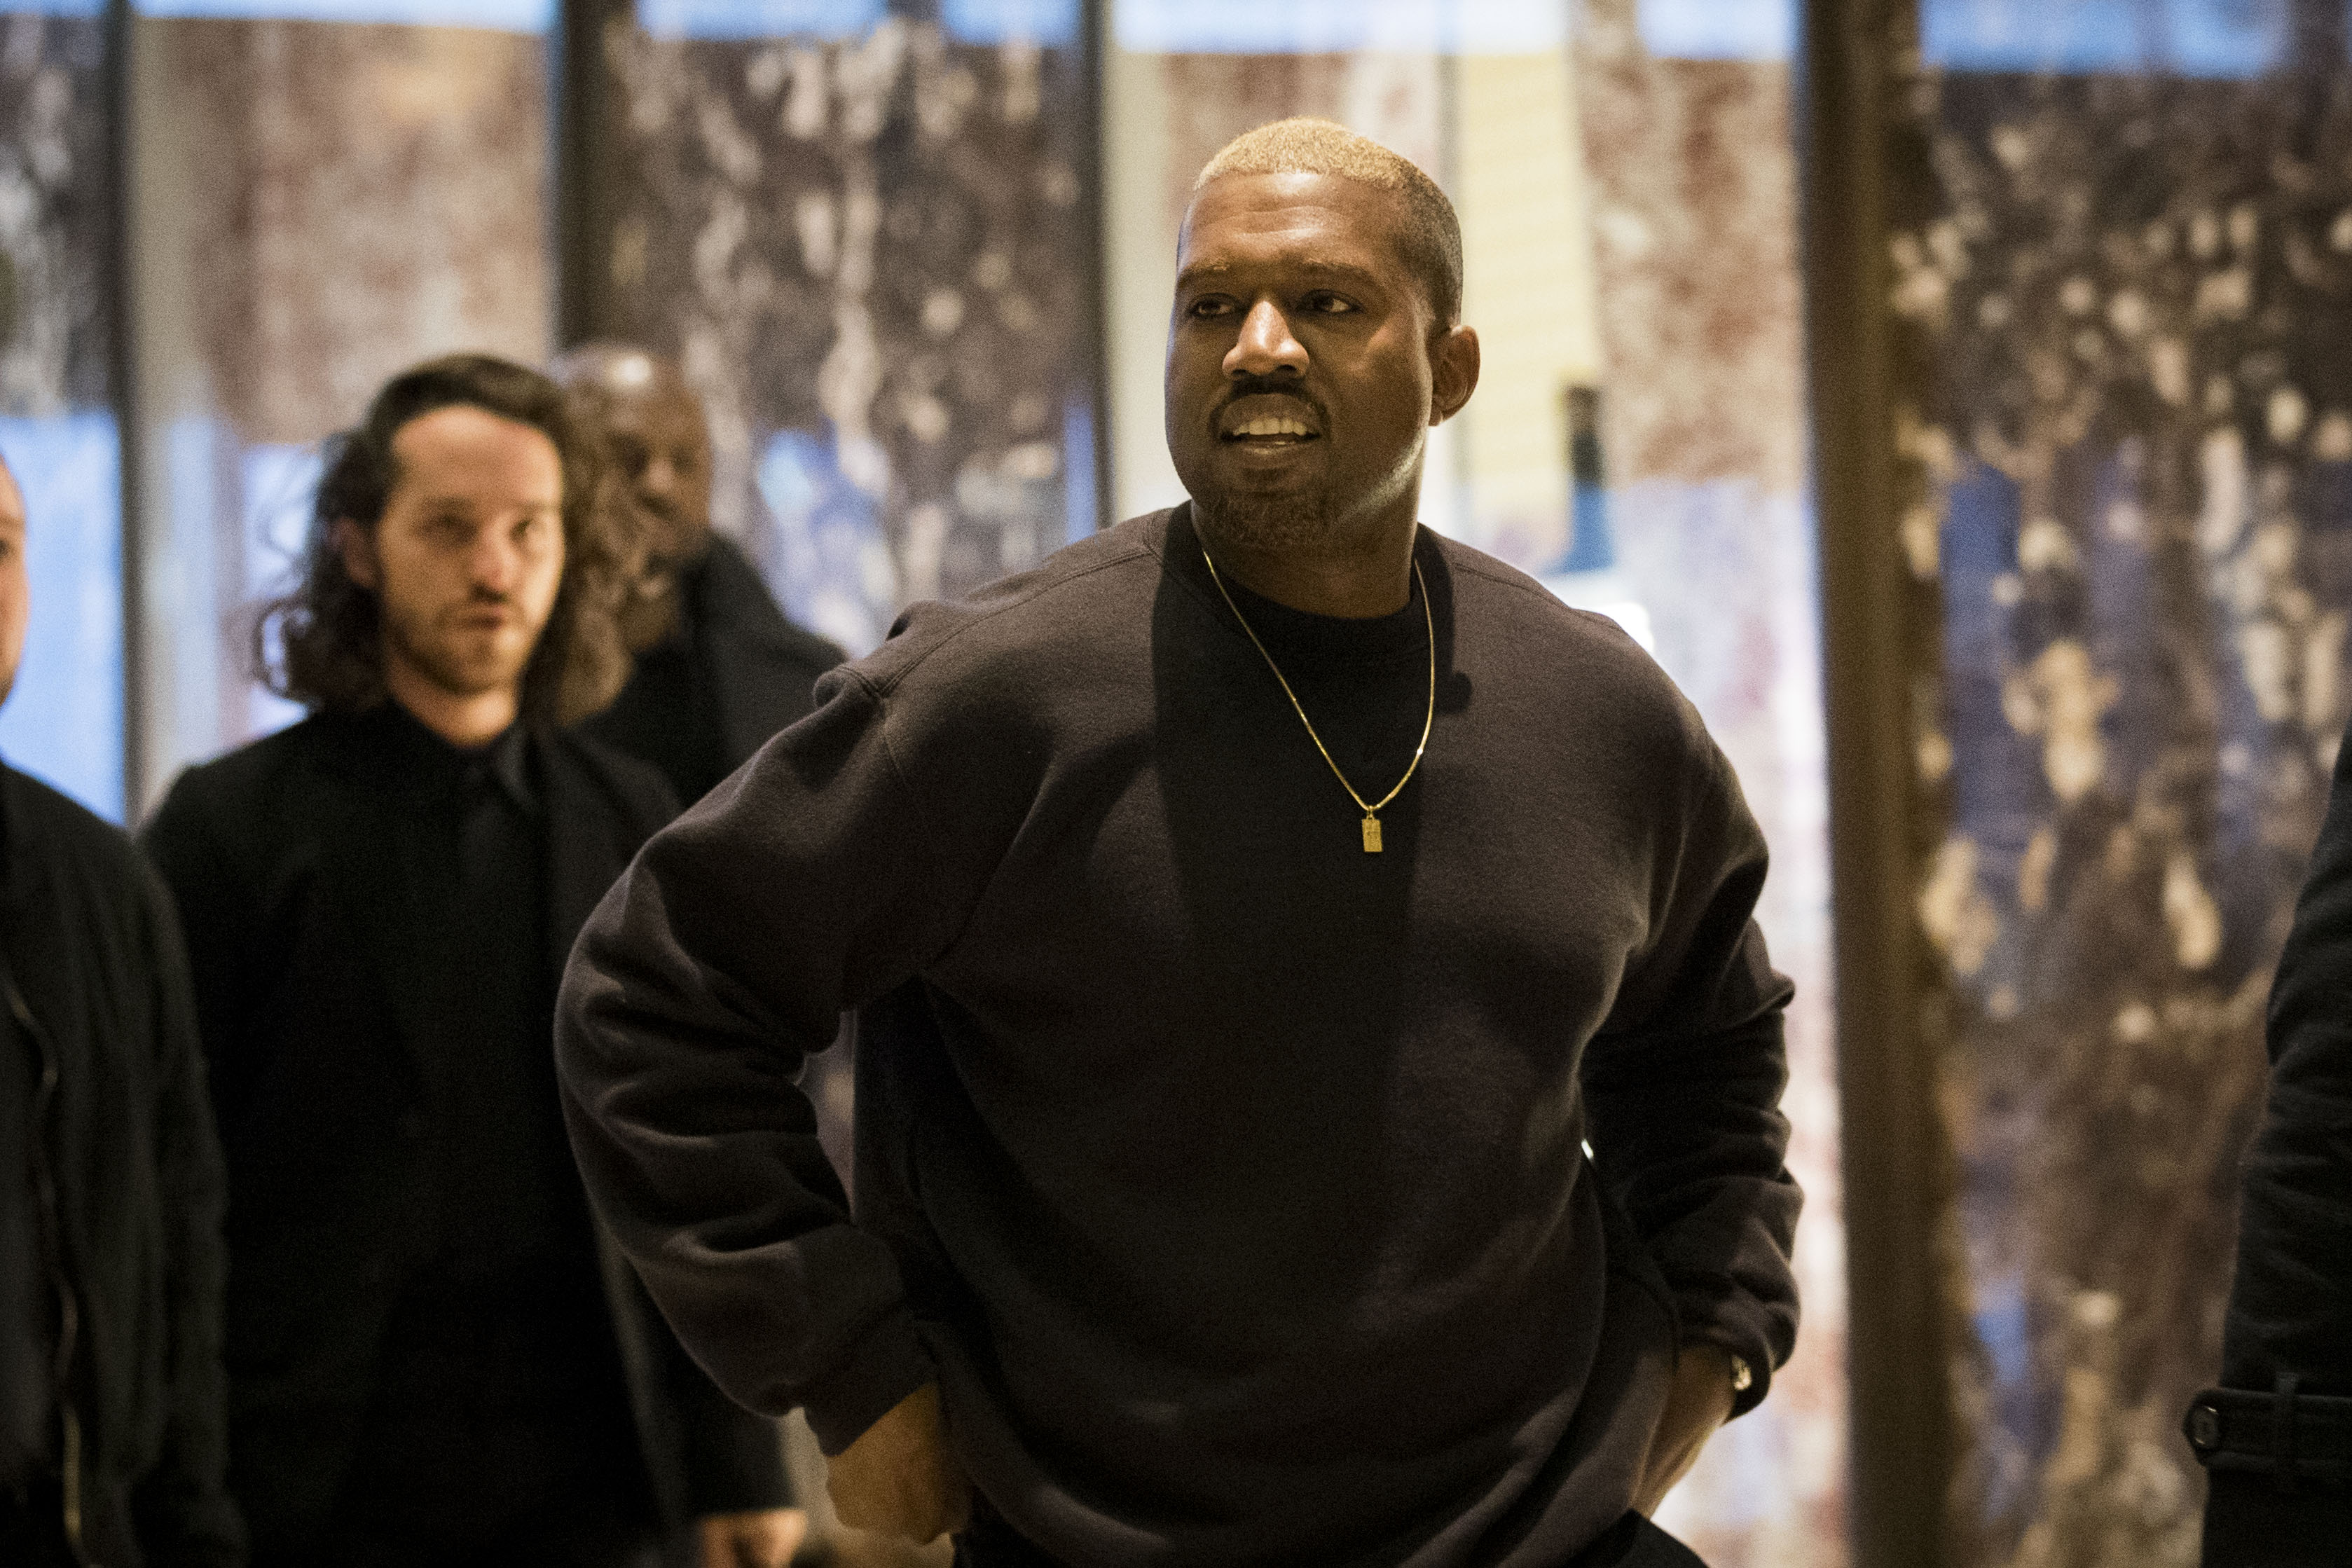 Kanye West 2020 Campaign Committee Claims Someone Stole Thousands To Pay Bills: Report